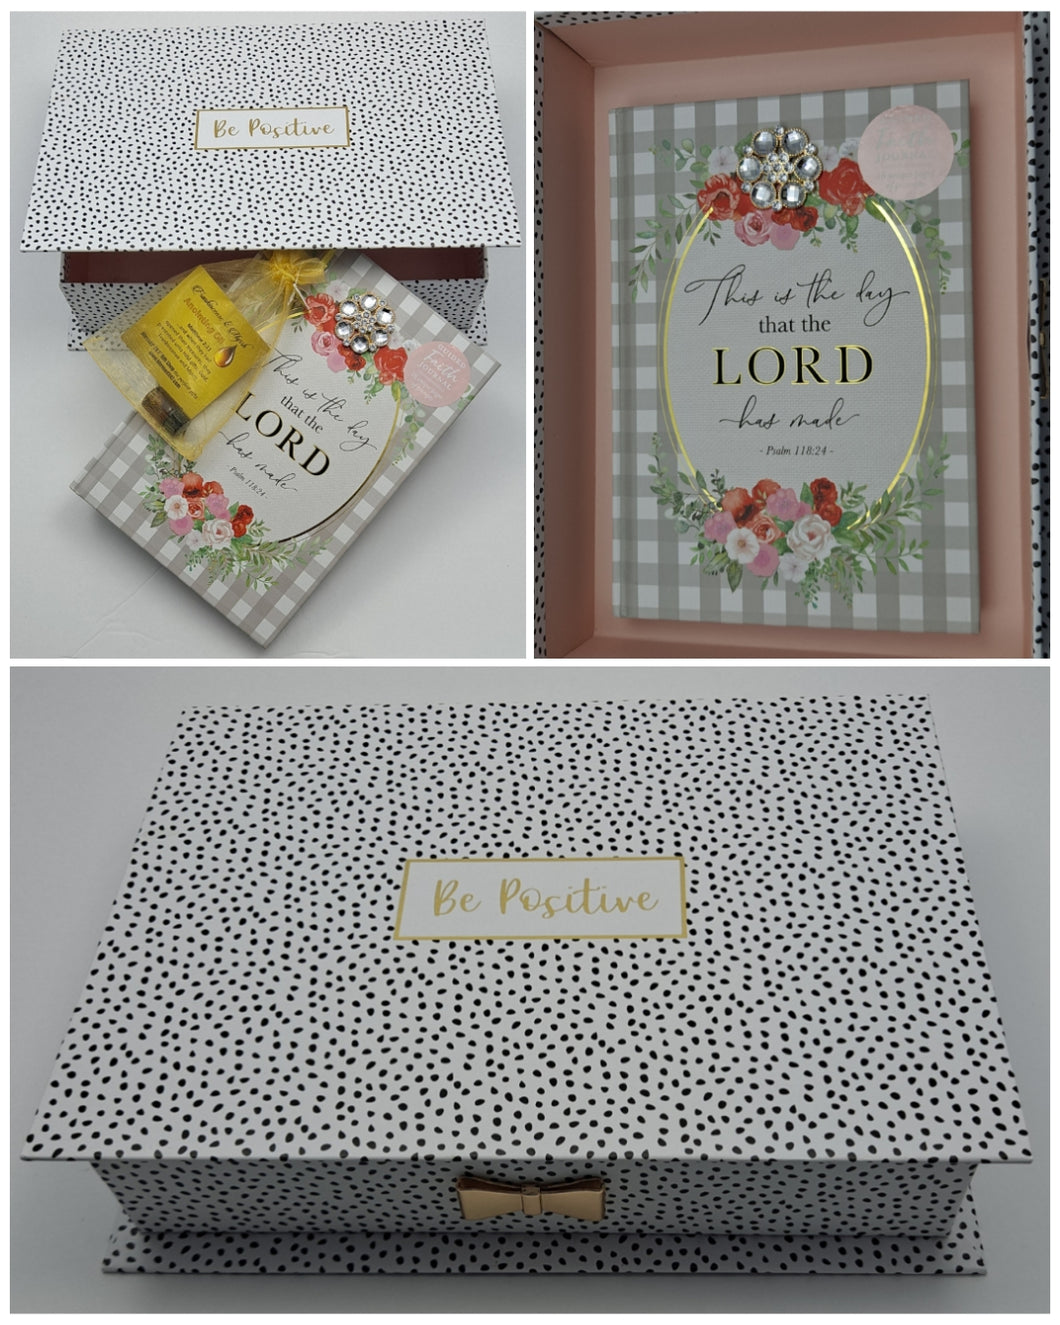 Journal □ Anointing Oil □ Gift Box (Today is the day) FREE SHIPPING